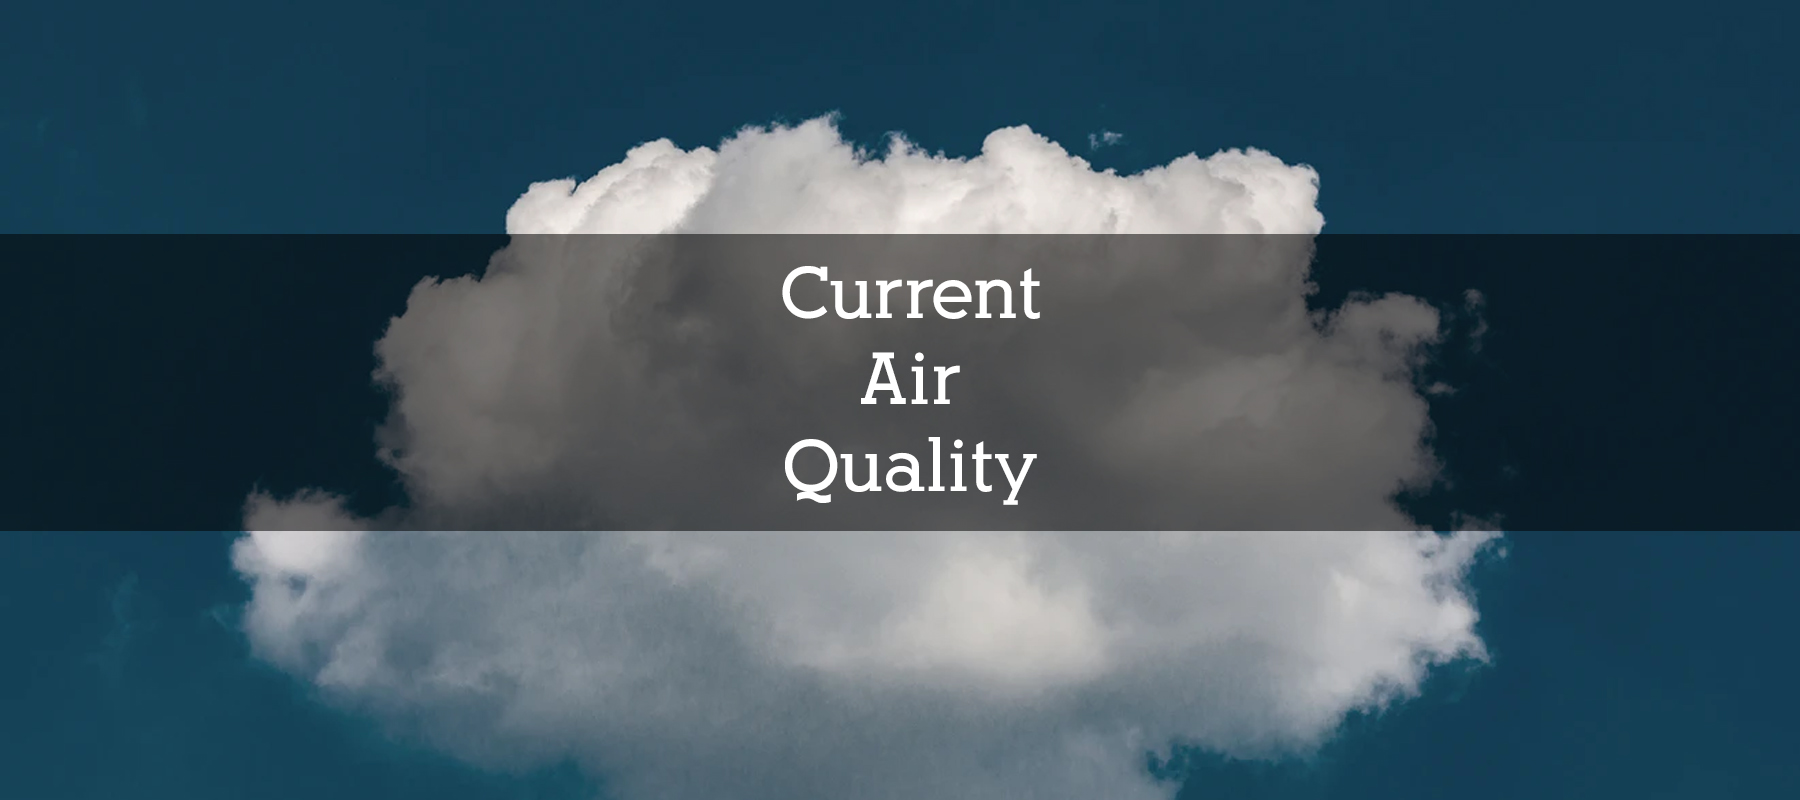 Current Air Quality in Colorado